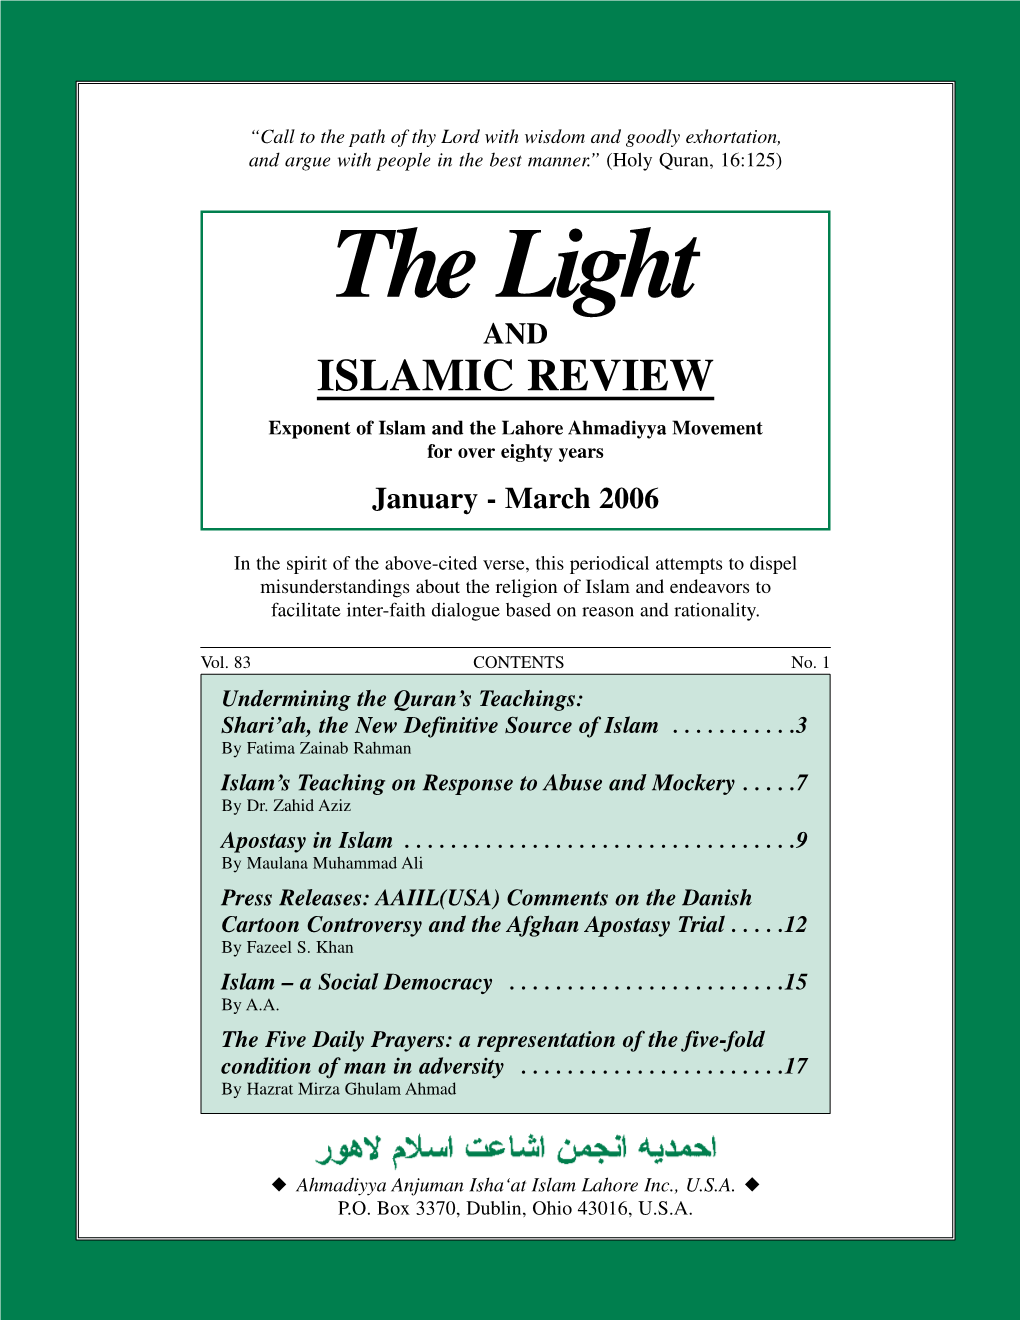 Light and ISLAMIC REVIEW Exponent of Islam and the Lahore Ahmadiyya Movement for Over Eighty Years January - March 2006